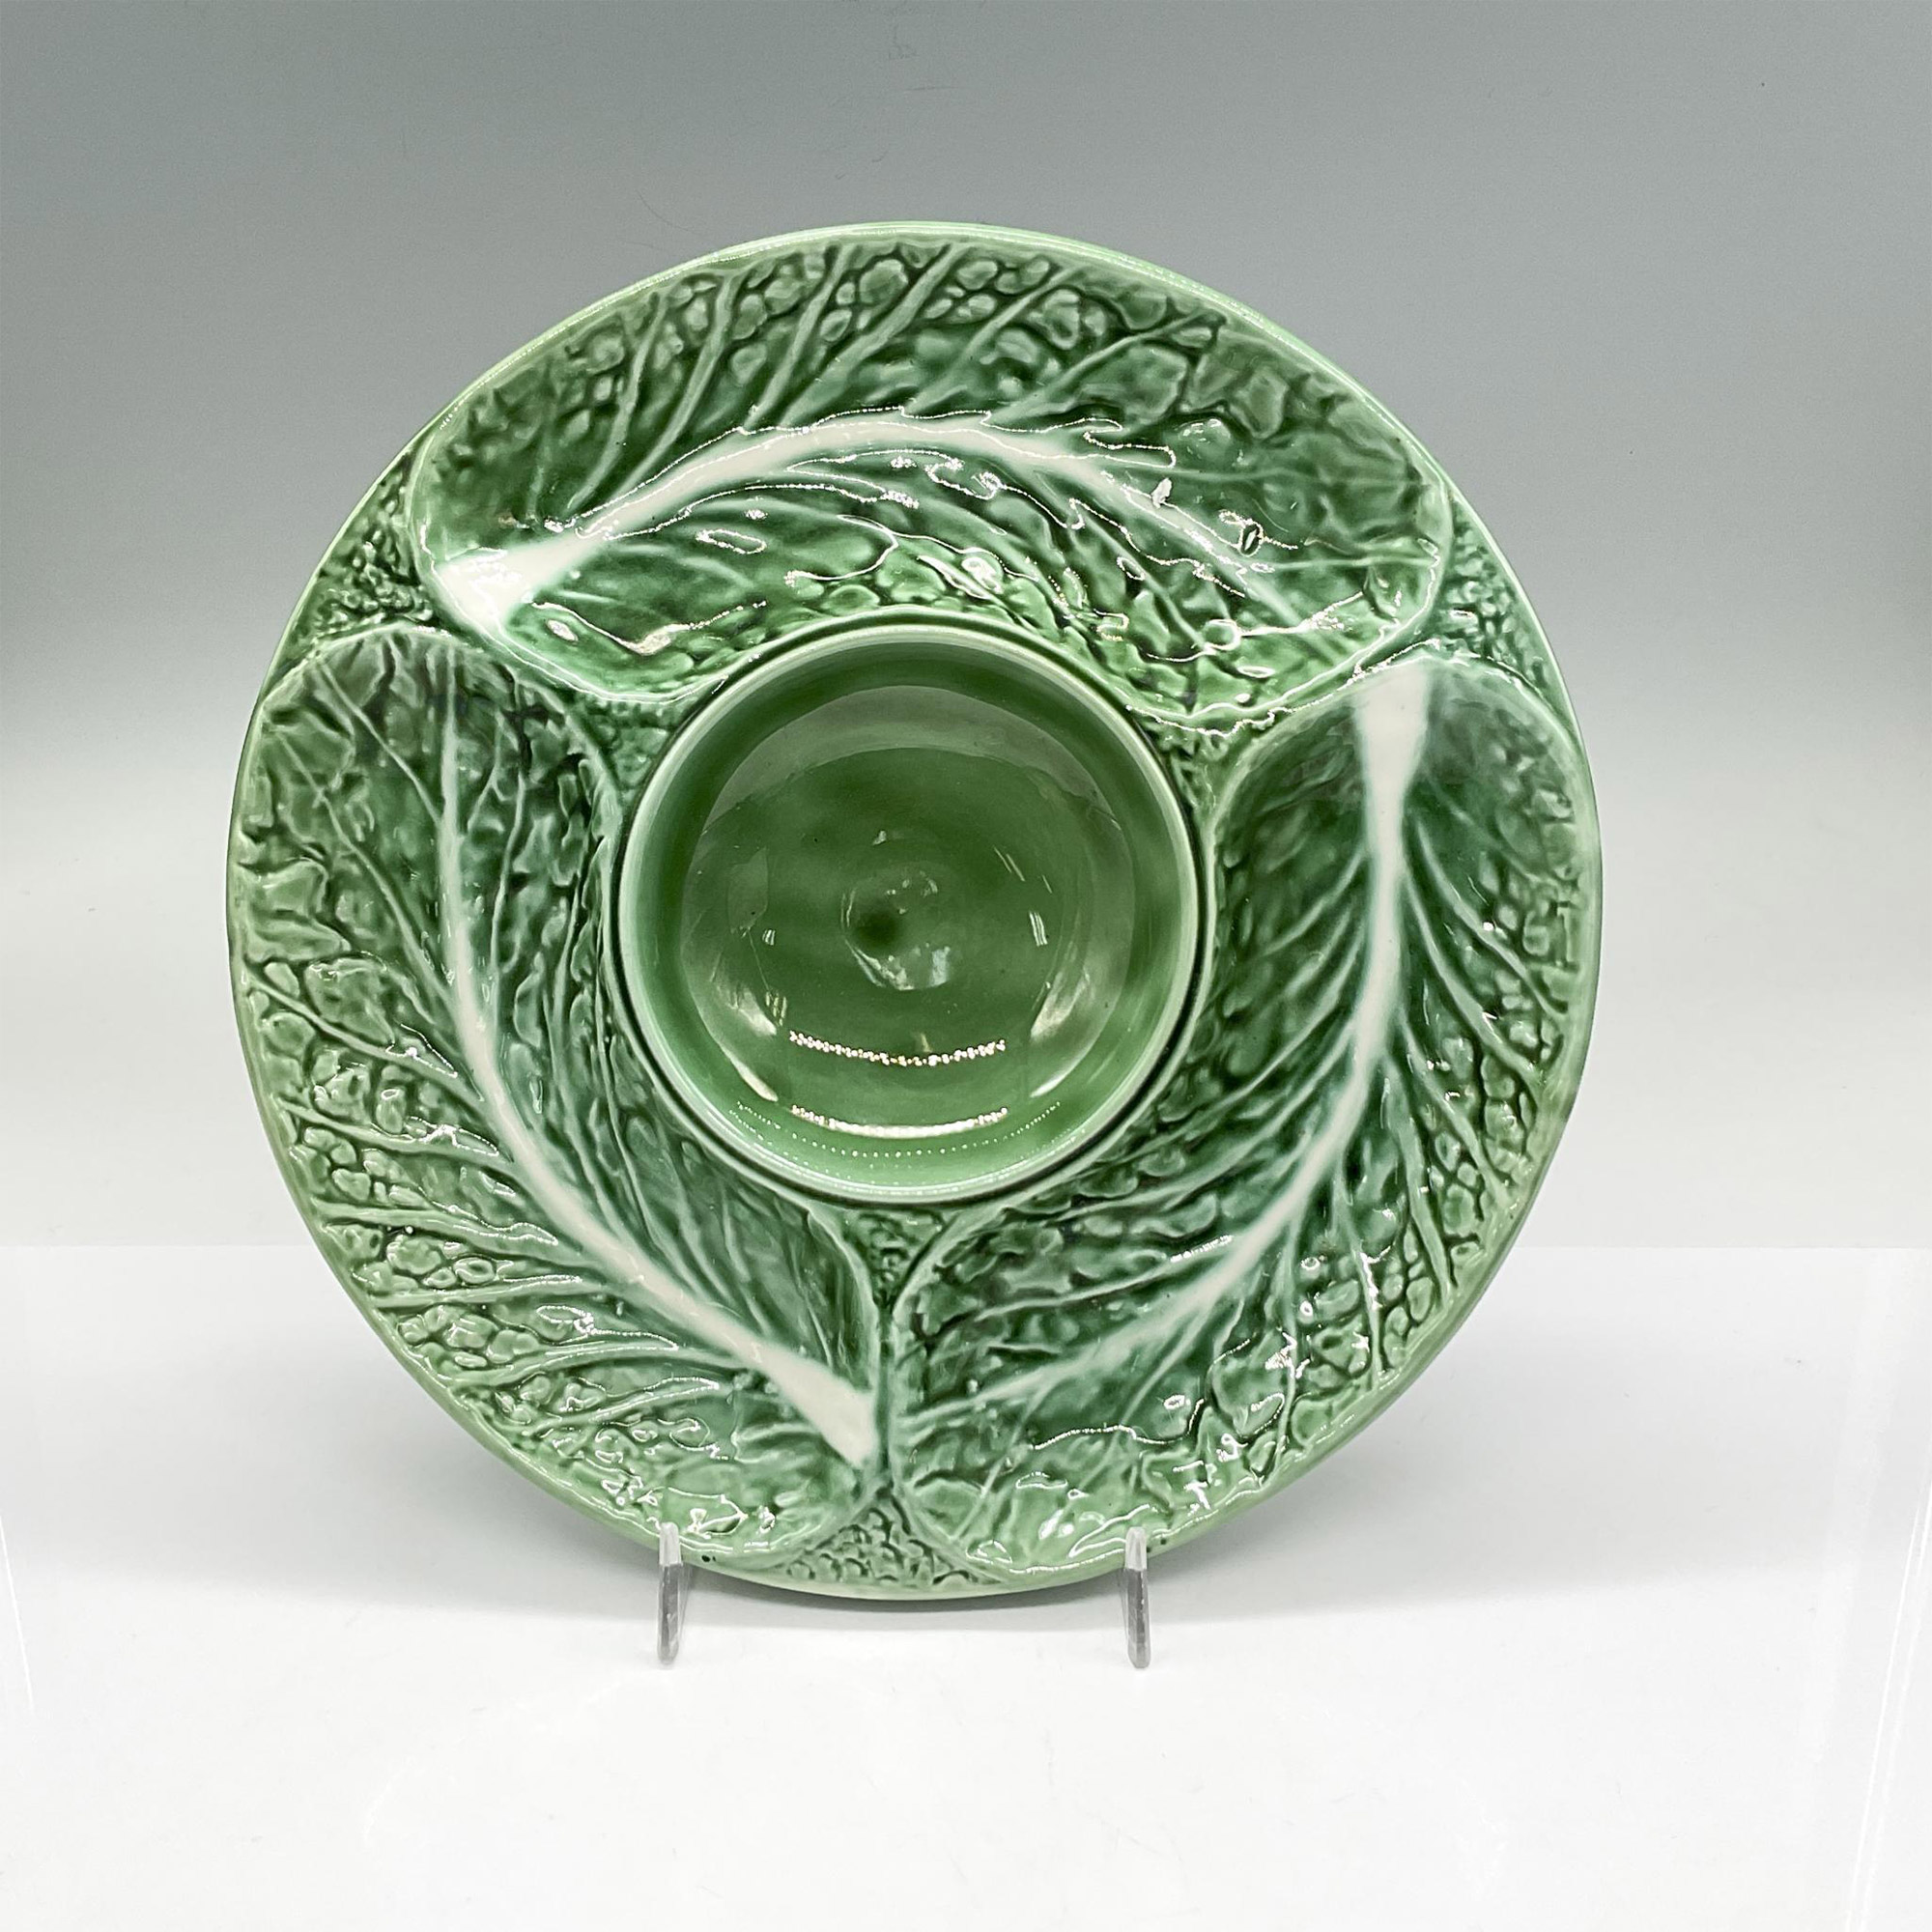 2pc Secla Cabbage Leaf Dish + Small Shaker/Condiment Dish - Image 2 of 9